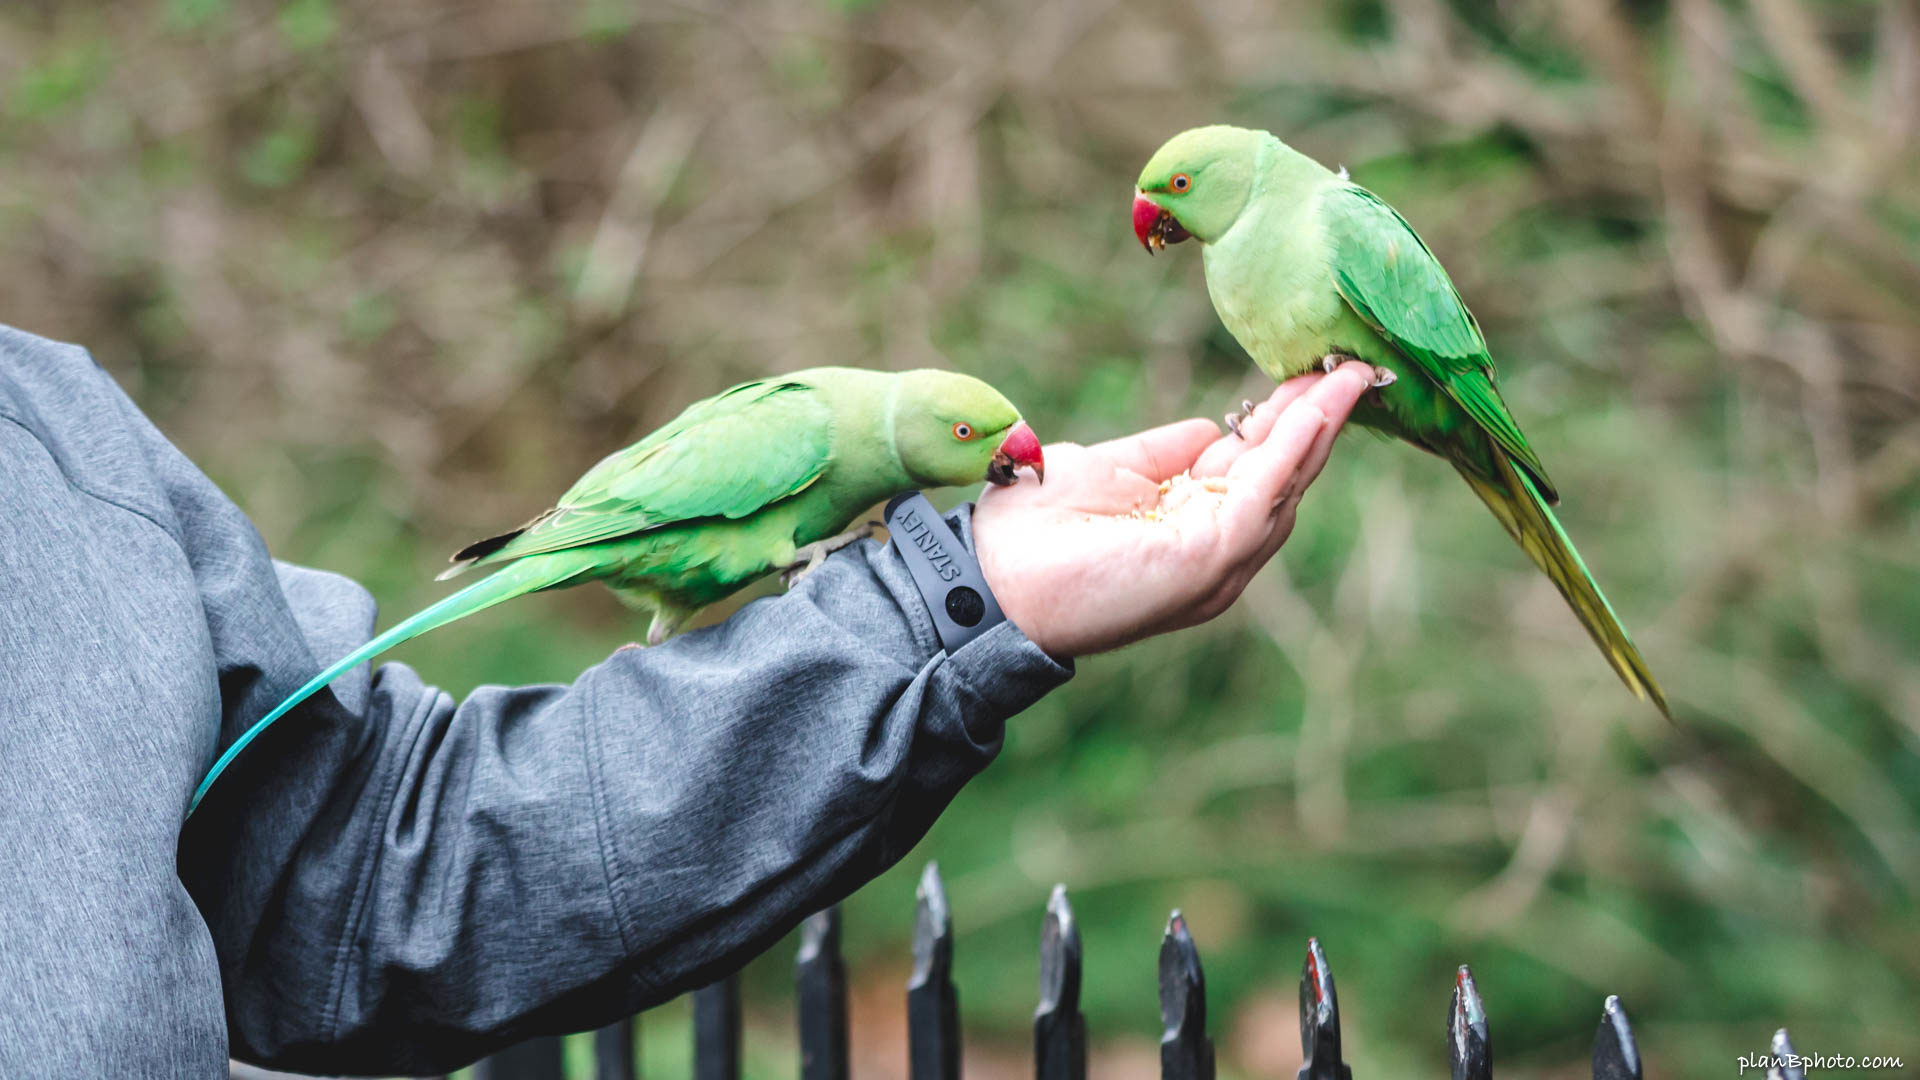 Two ringneck parakeets sitting on a hand. One parrot bites